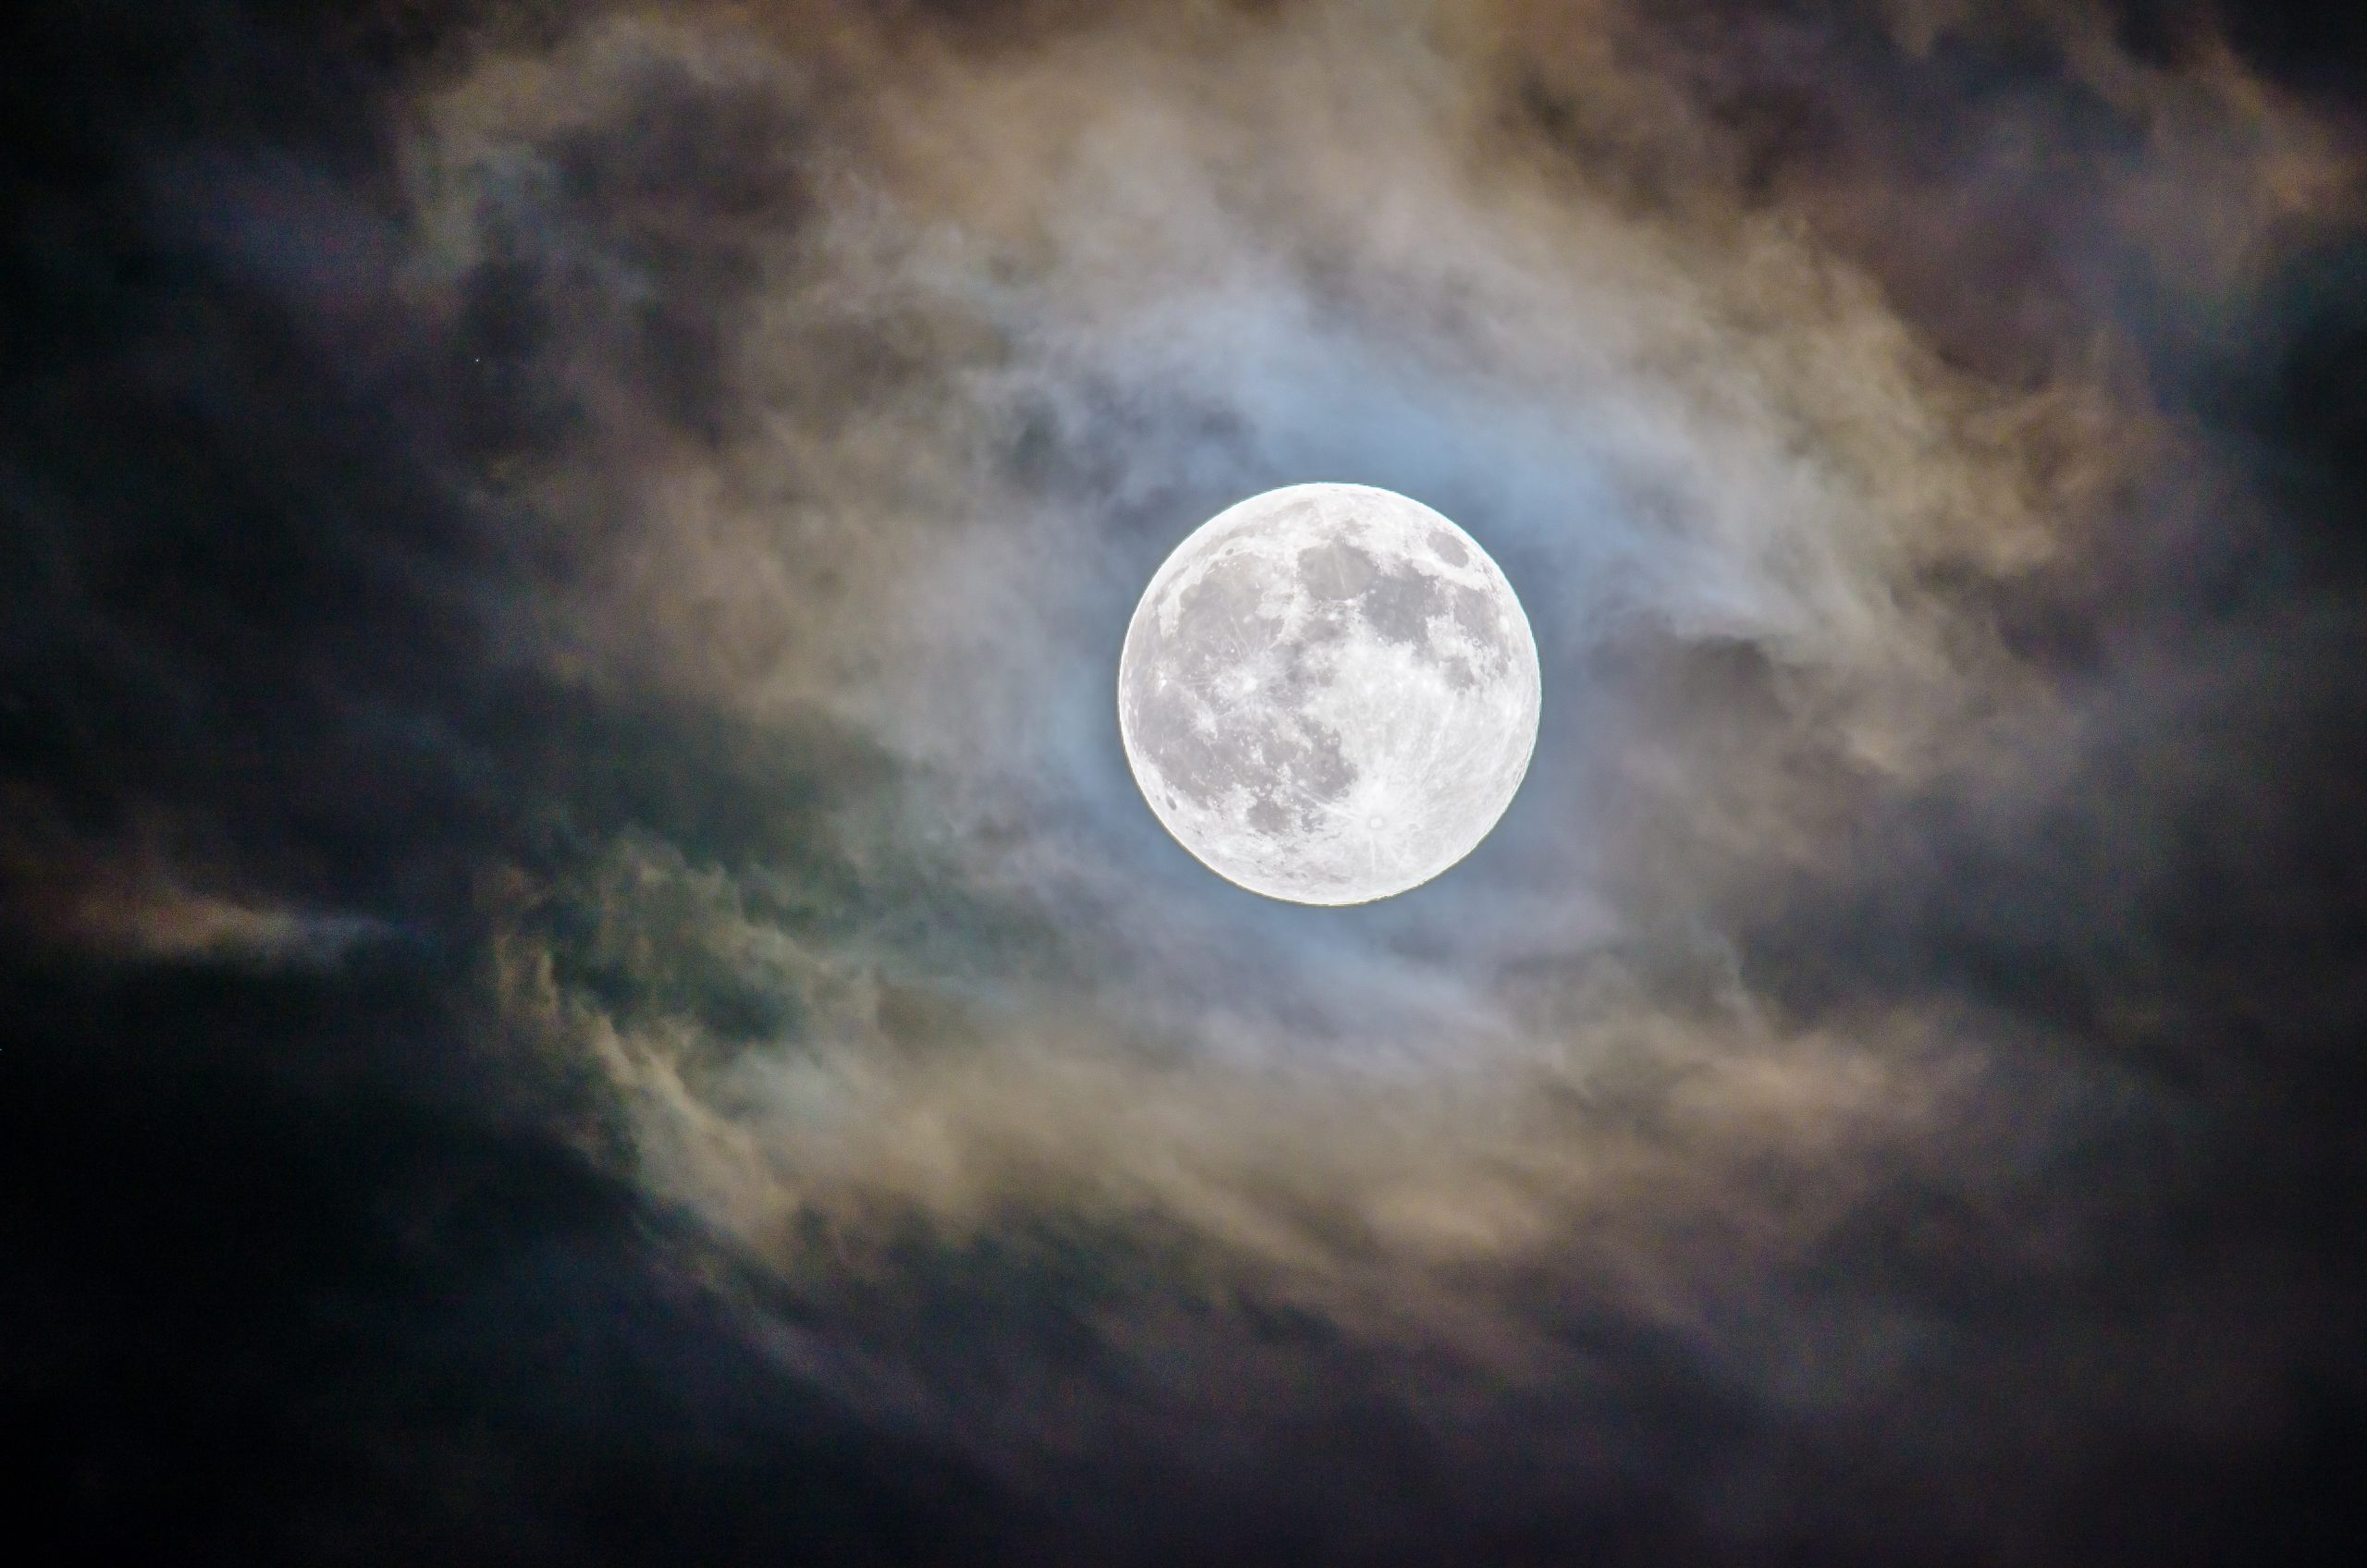 nJoy Vision Halloween Eye Safety story image of full moon lighting up a dark night that could cause eye injuries